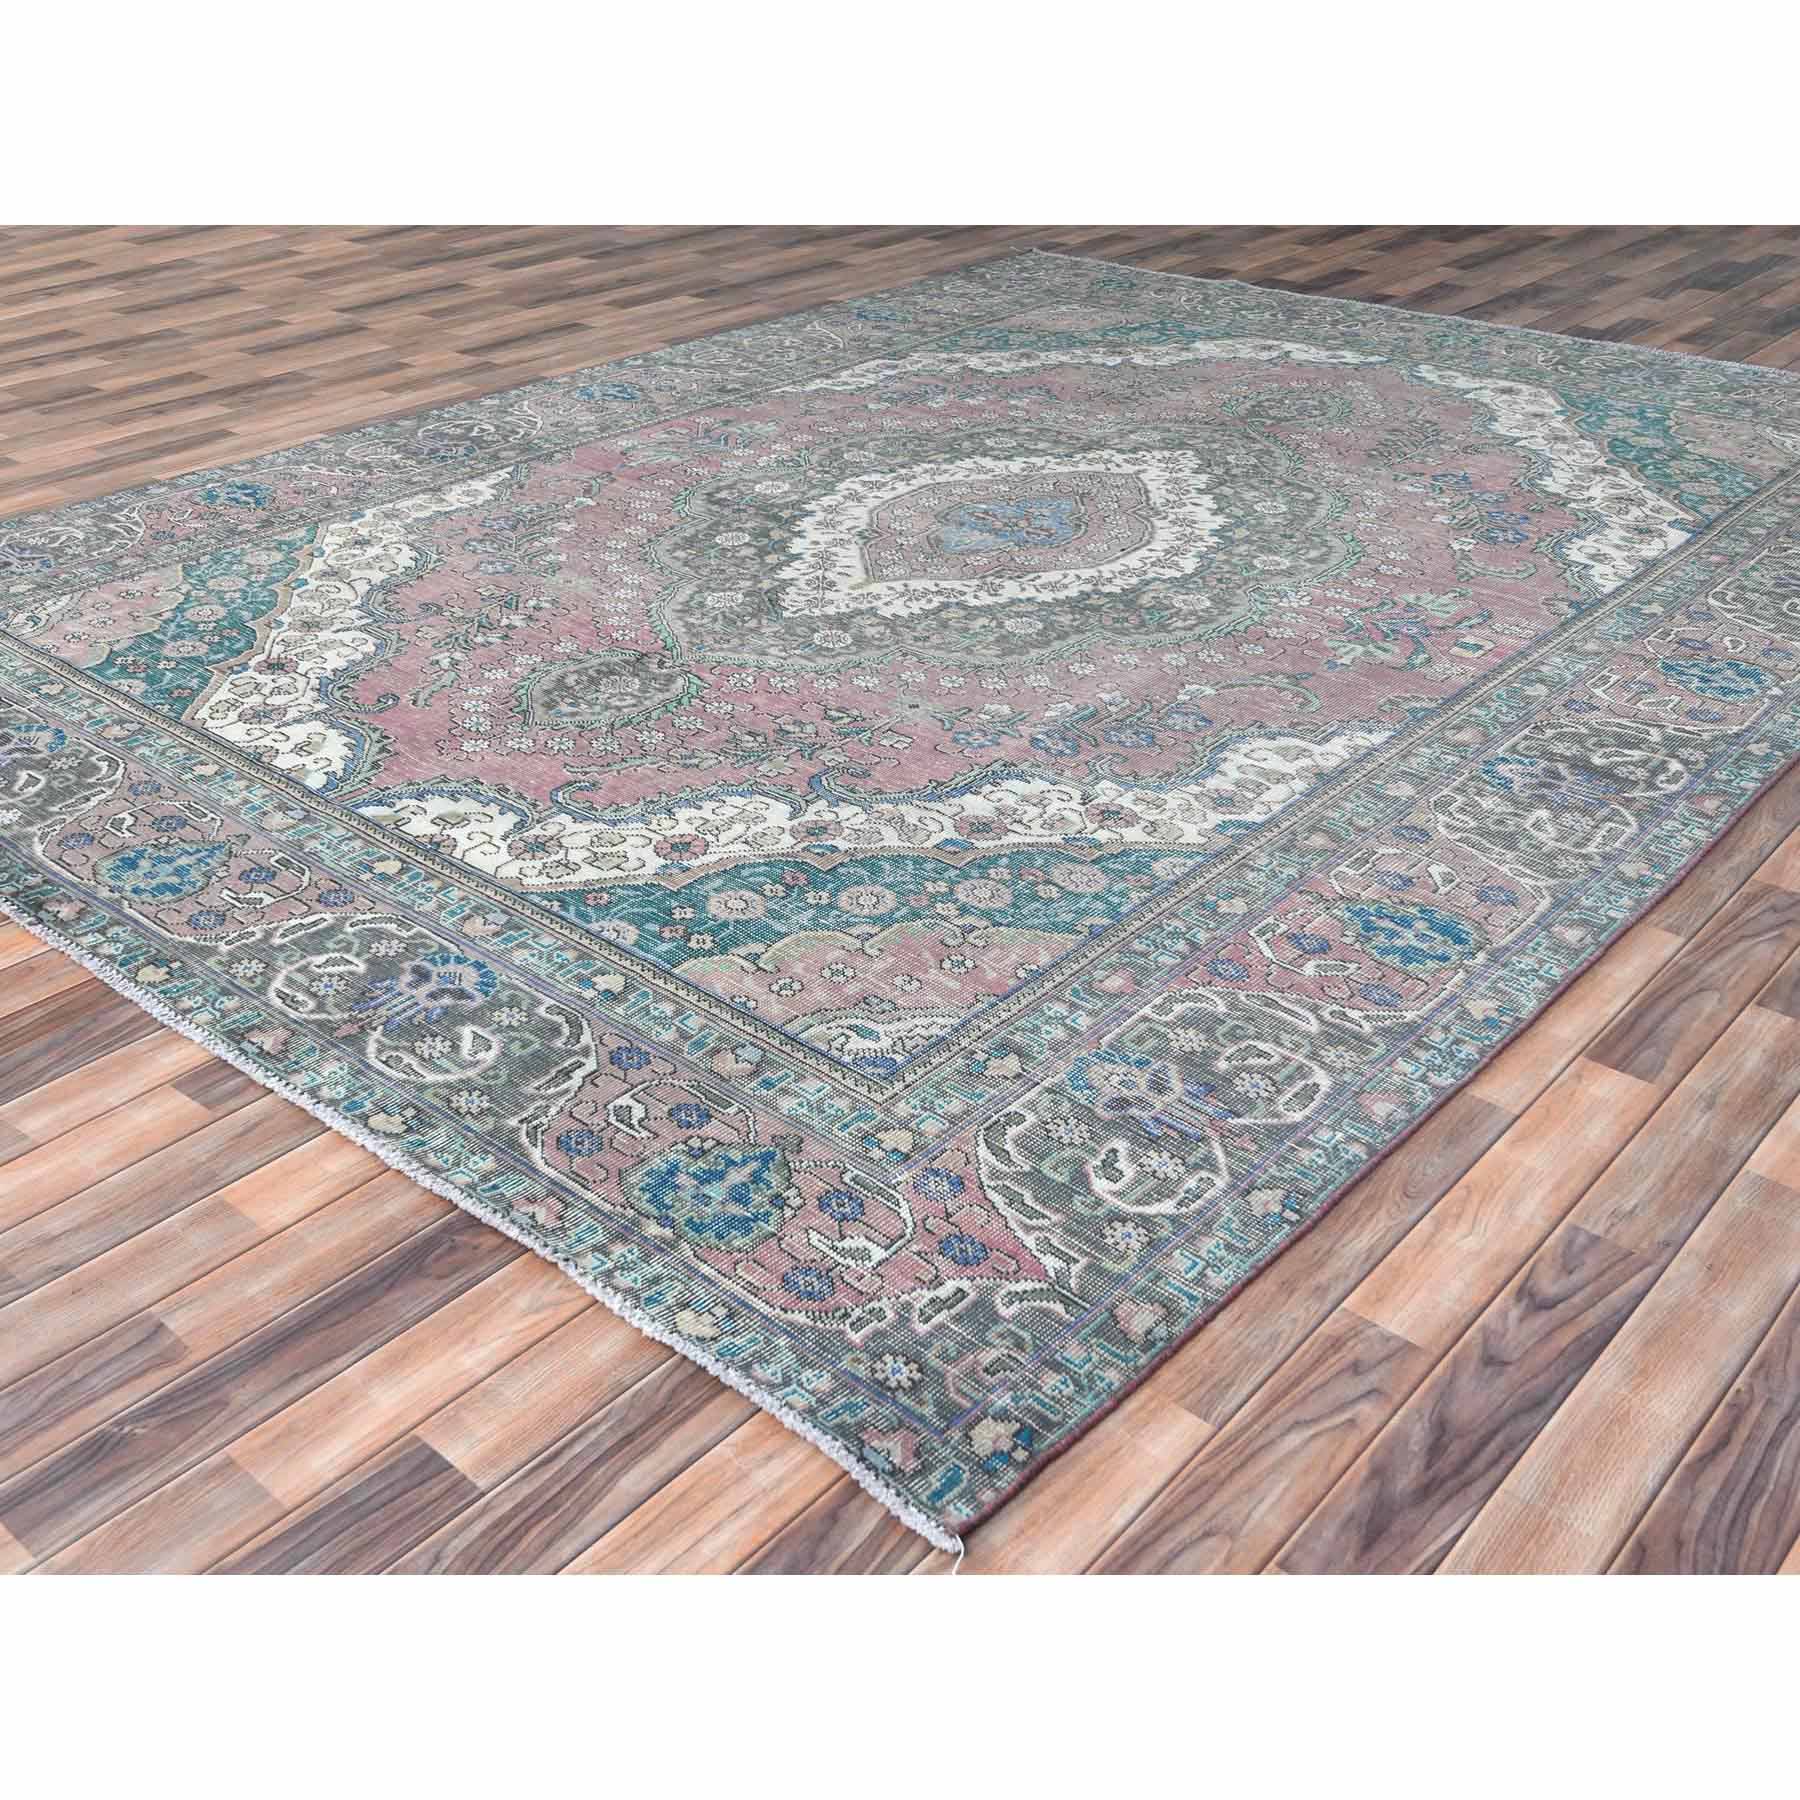 Overdyed-Vintage-Hand-Knotted-Rug-309845